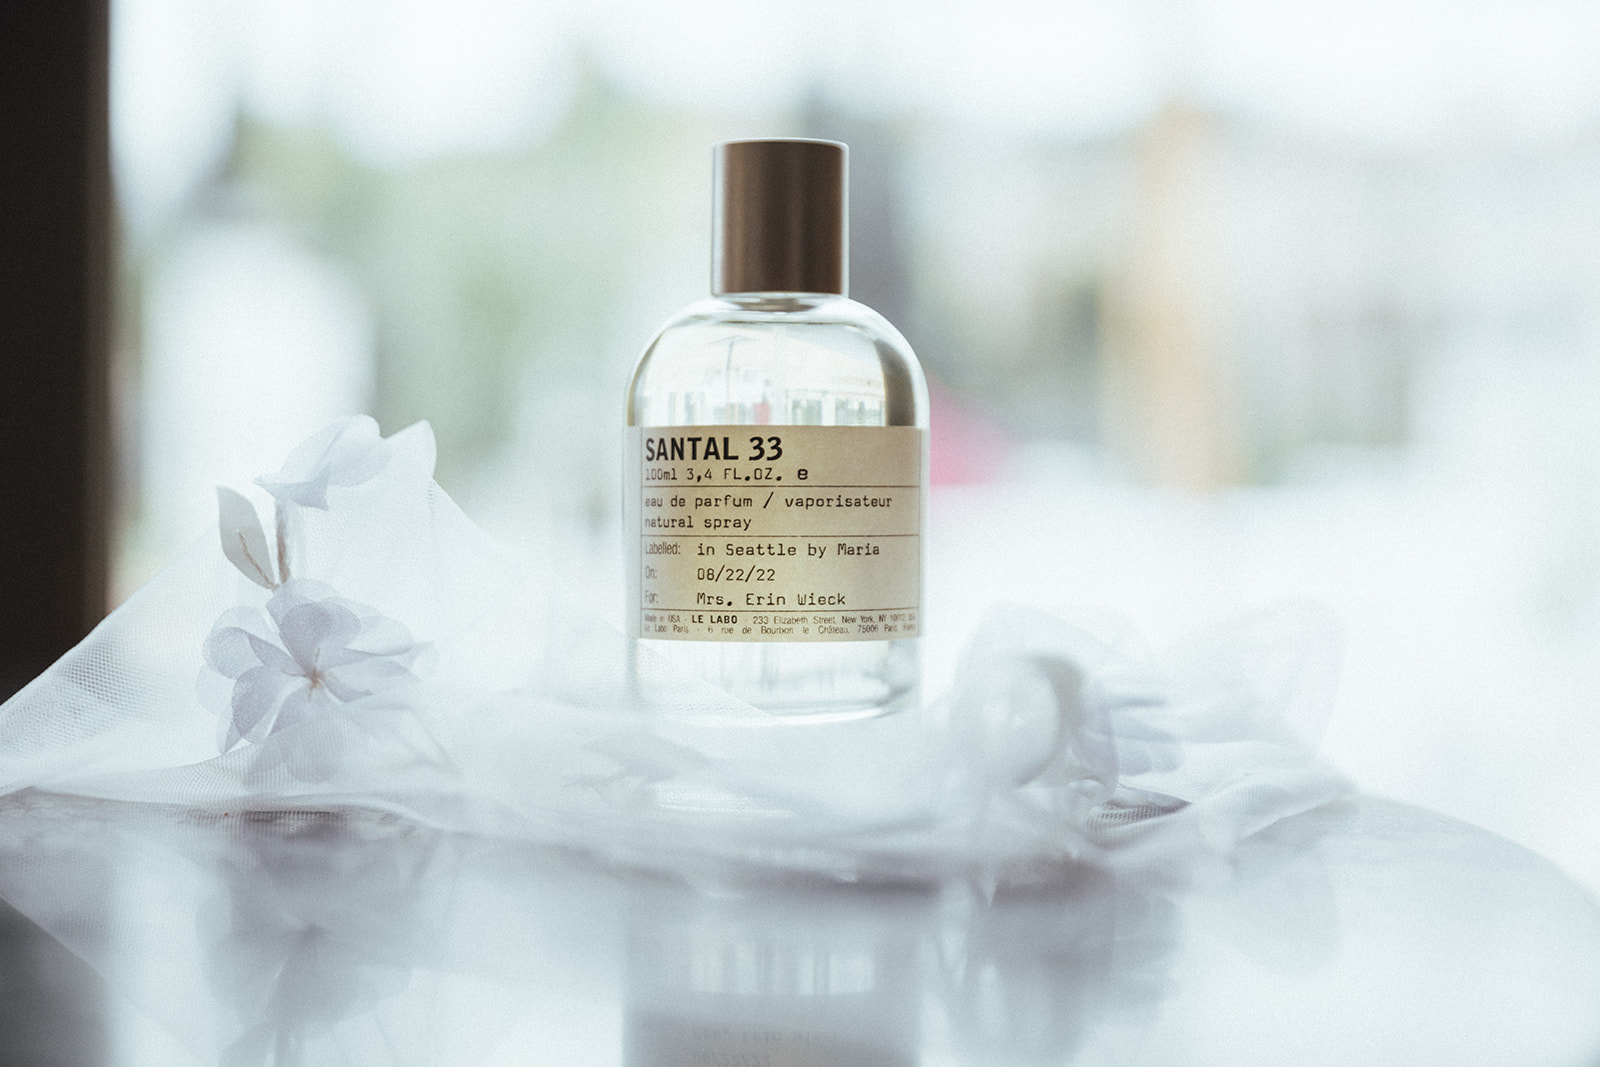 Brides wedding details included a personalized bottle of perfume from Santal 33. 